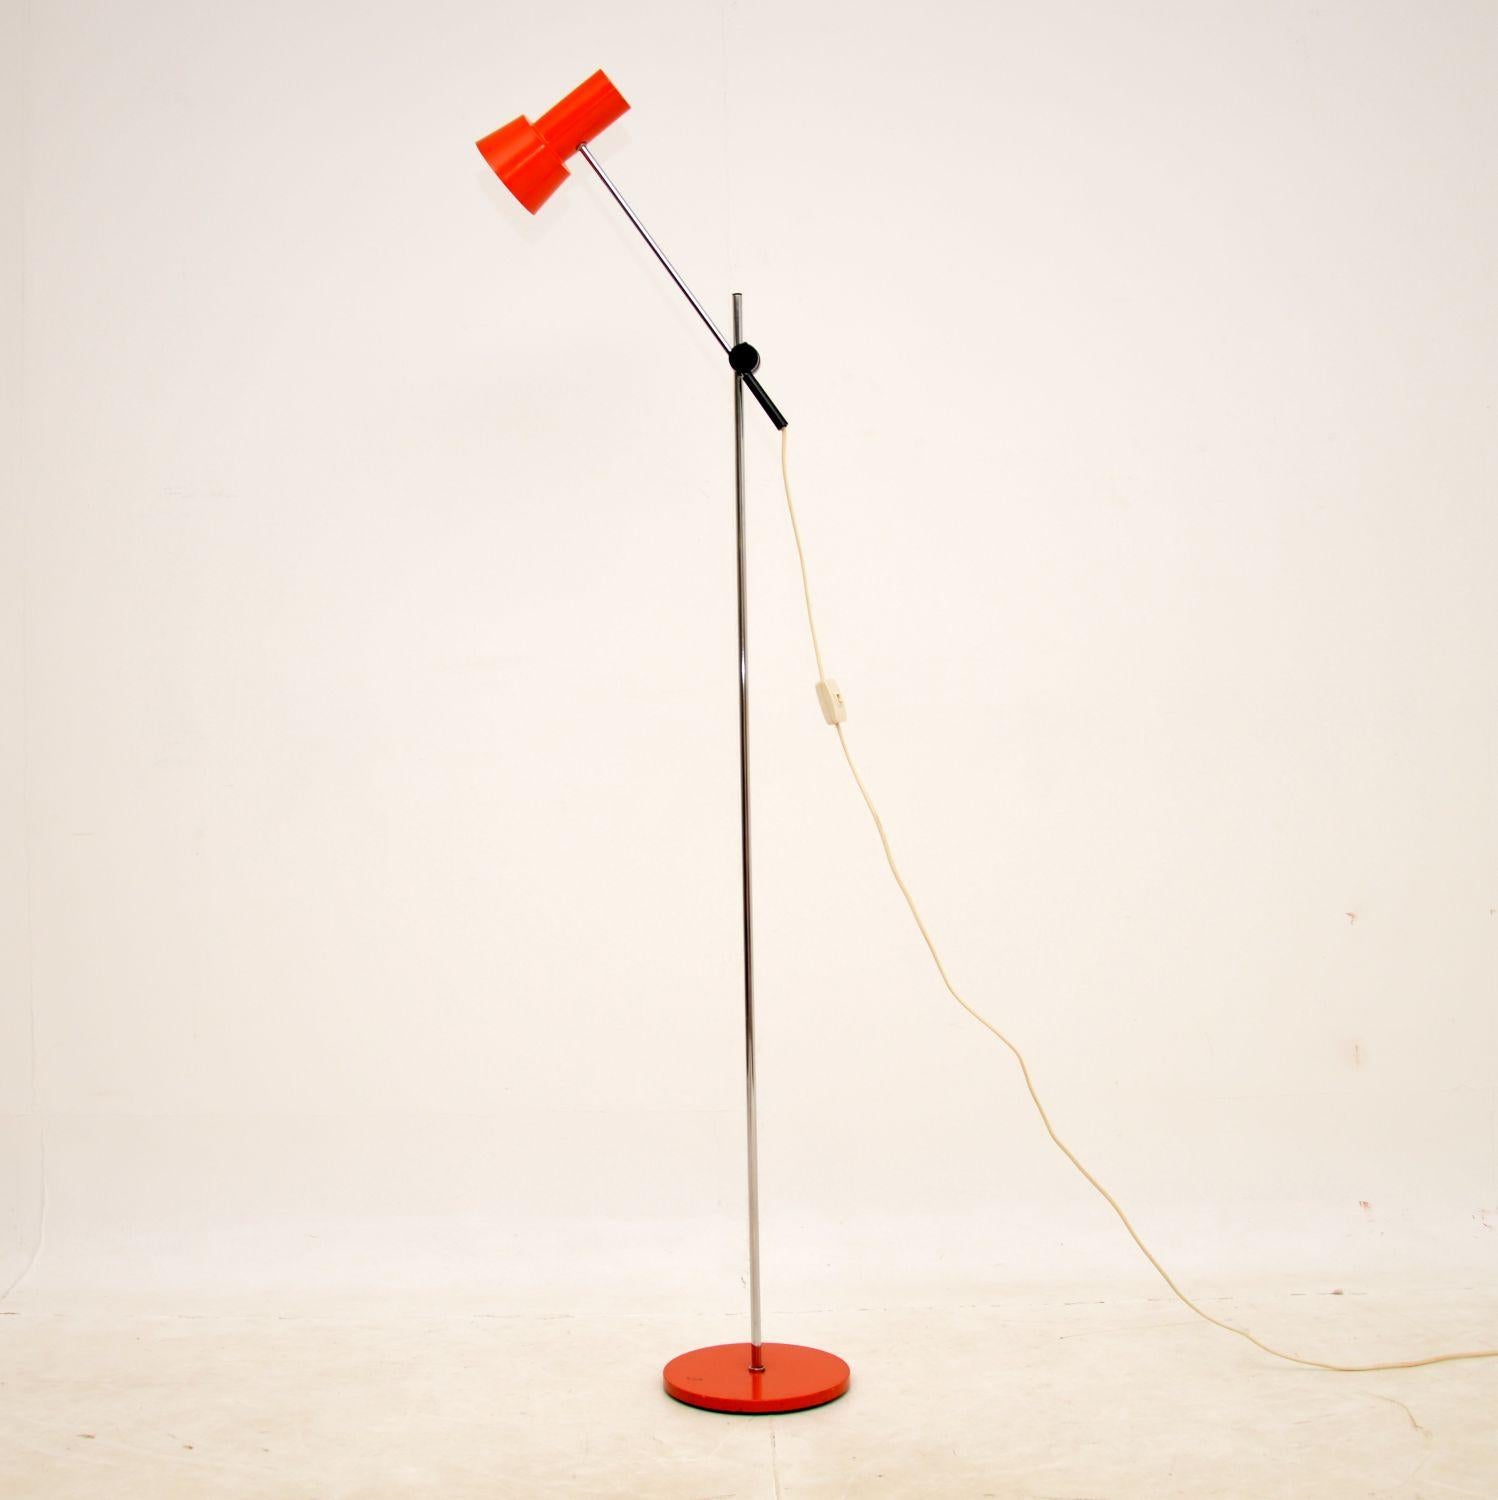 A very stylish and well made vintage floor lamp in chrome, with a deep orange painted shade and base. This was made in France, it dates from the 1960-70s.

It is of superb quality and has a beautiful design. The angle can be adjusted to varying